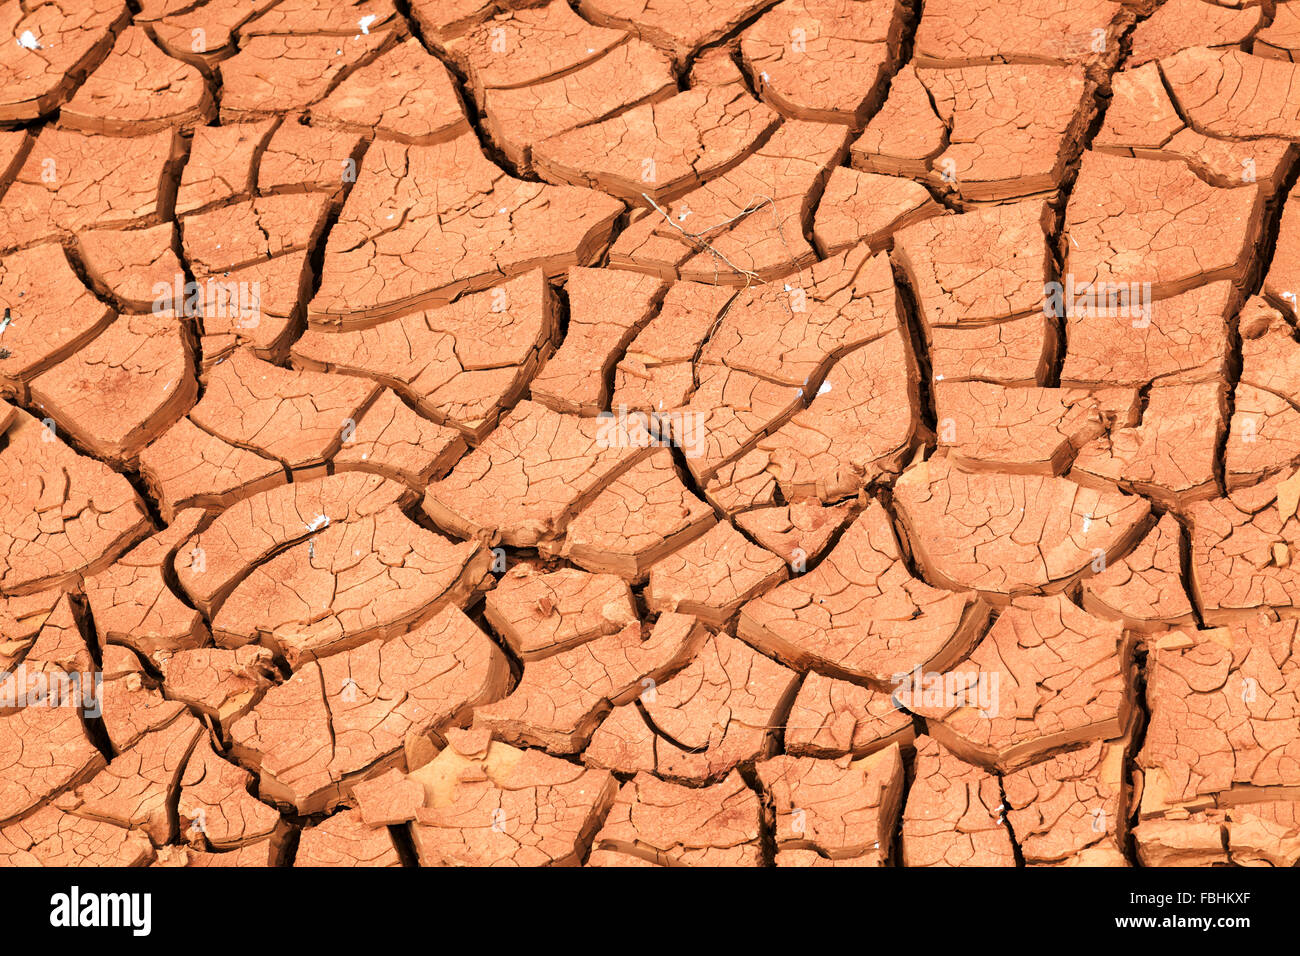 cracked soil because of drought Stock Photo